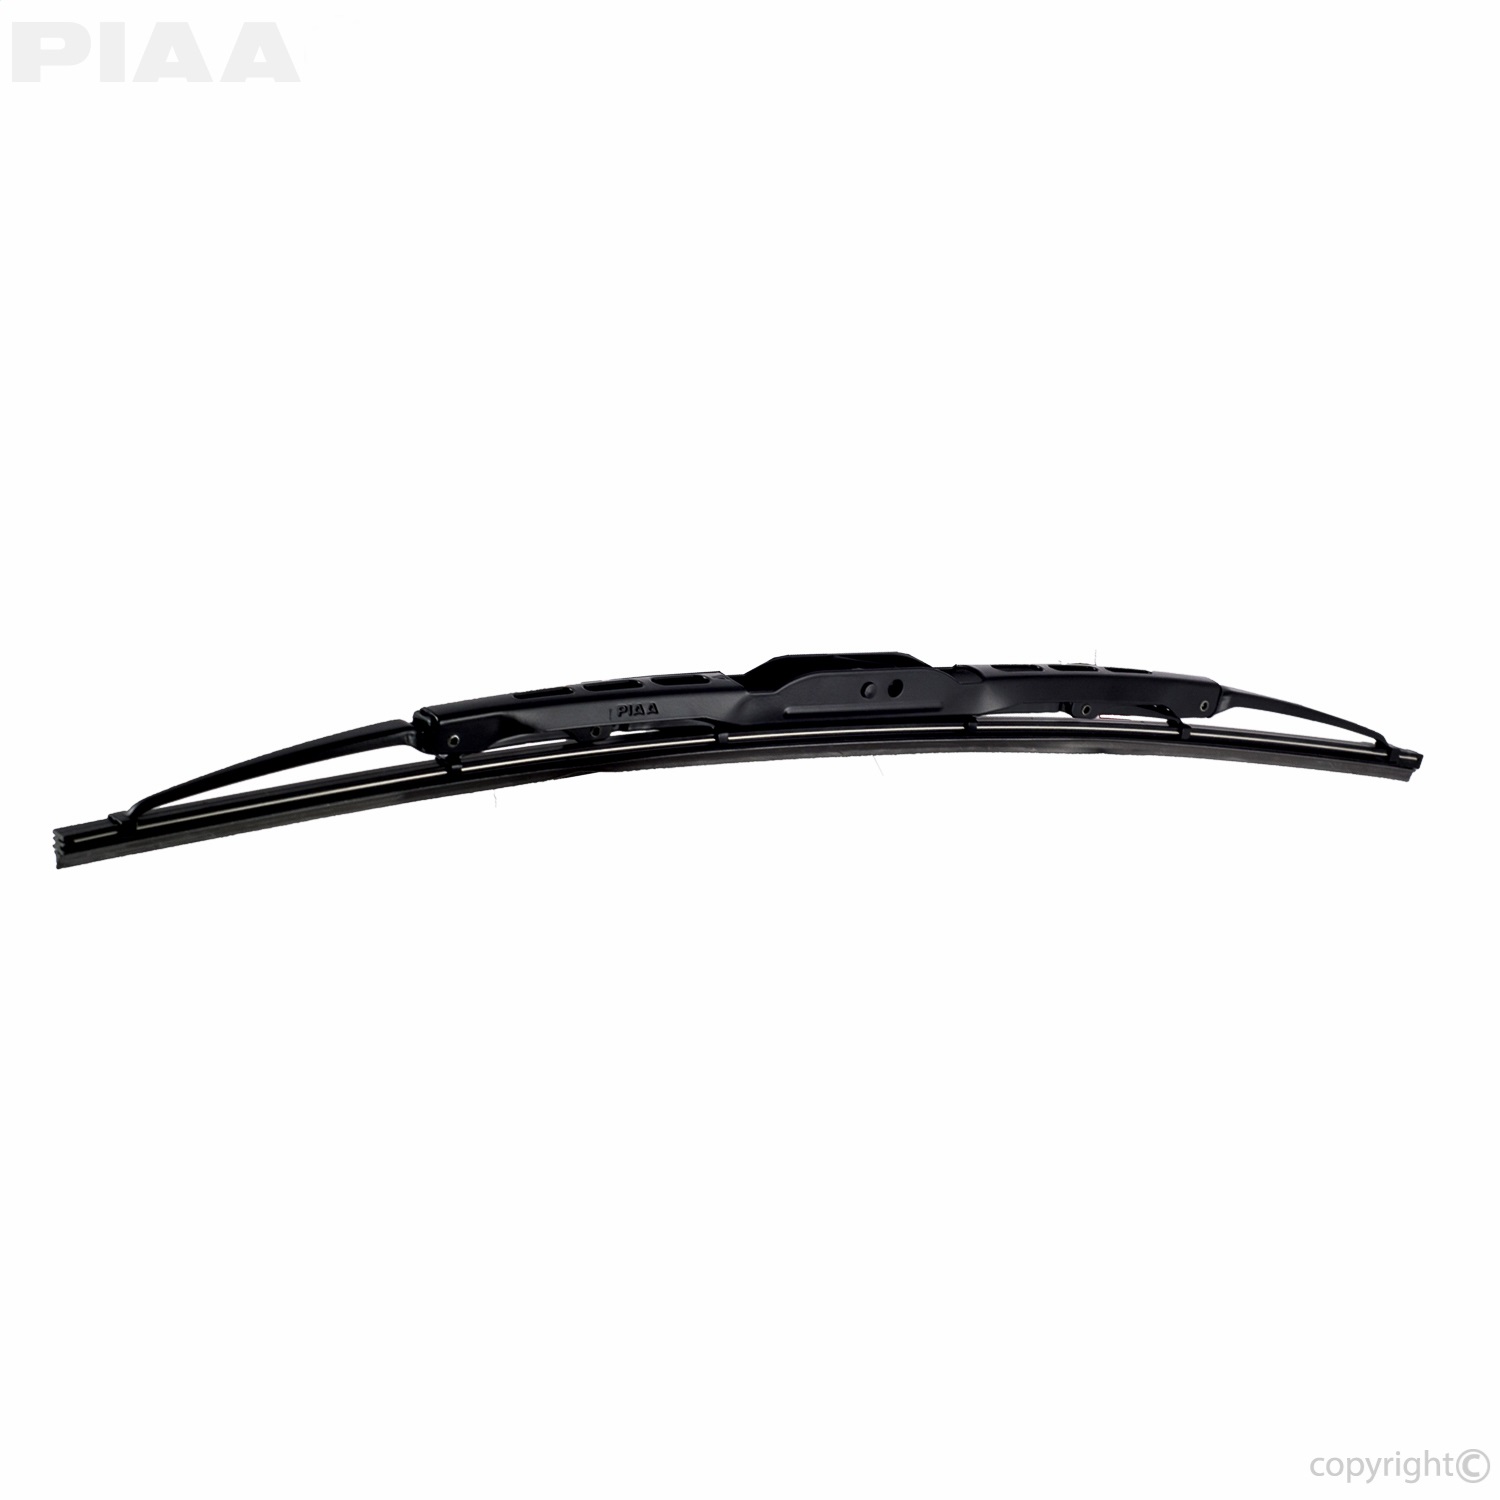 Denso Rear Wiper Blade for 1997-2008 Ford Expedition Windshield Windscreen mt